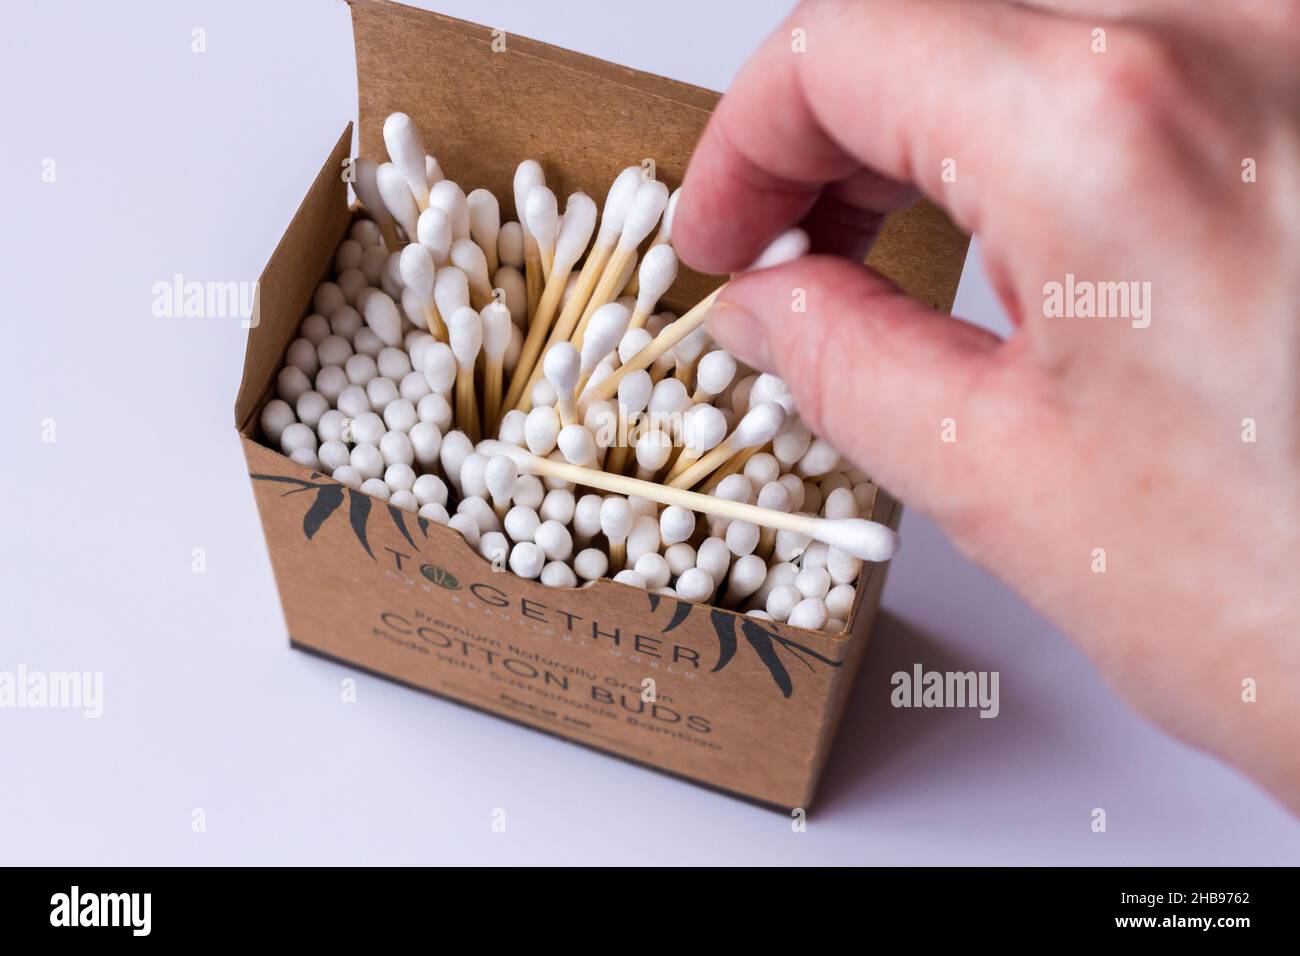 Opened box of eco friendly bamboo cotton buds Stock Photo